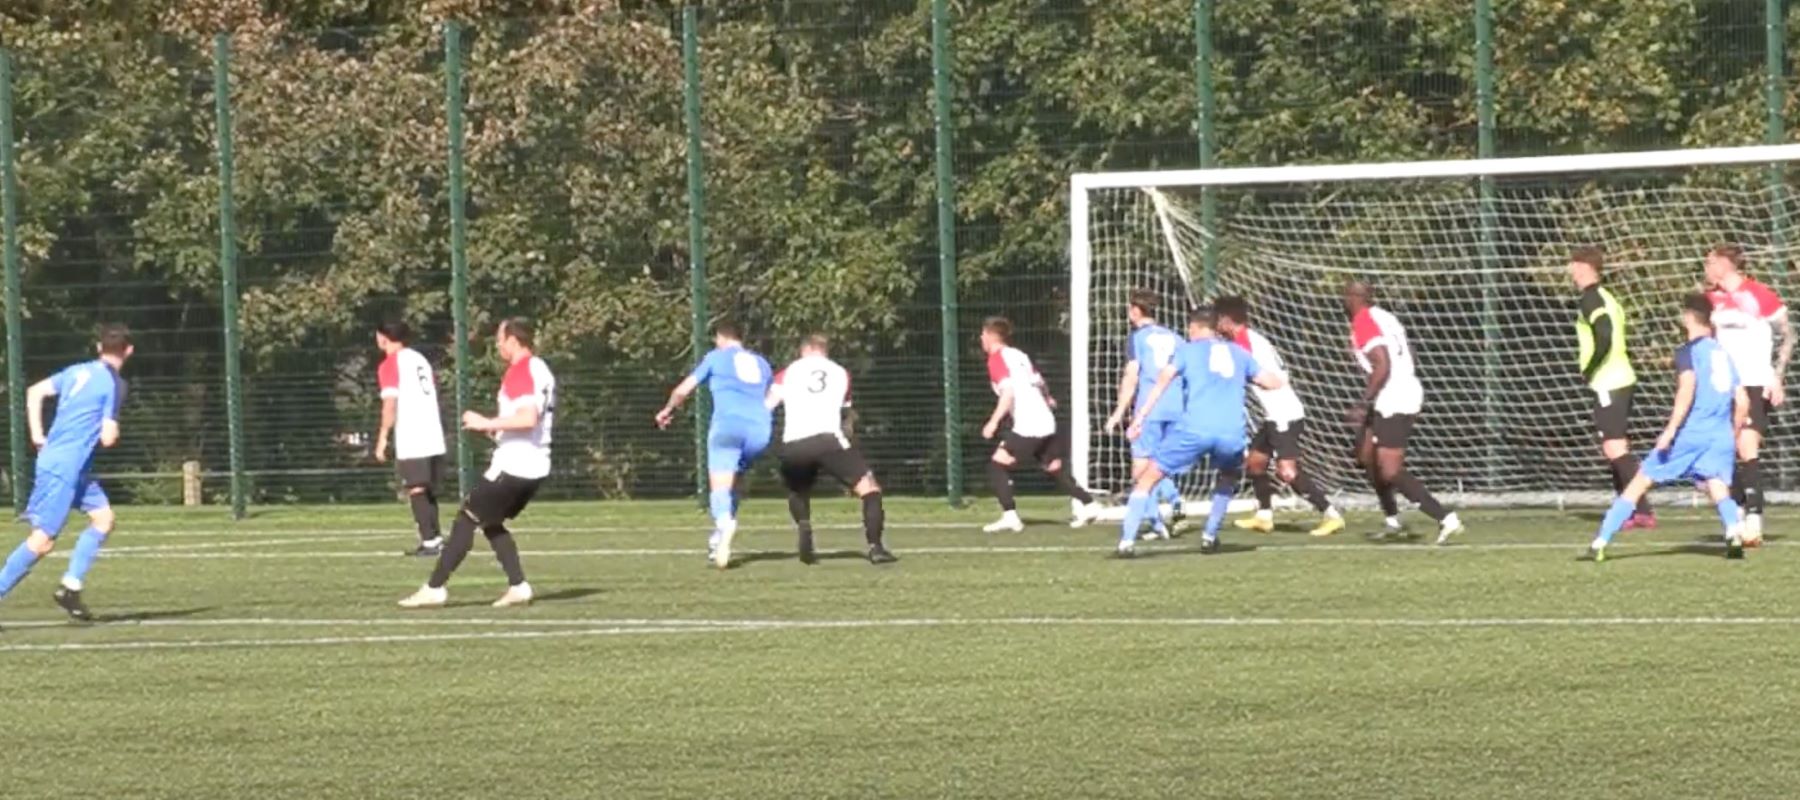 Scene from the goalmouth in football match